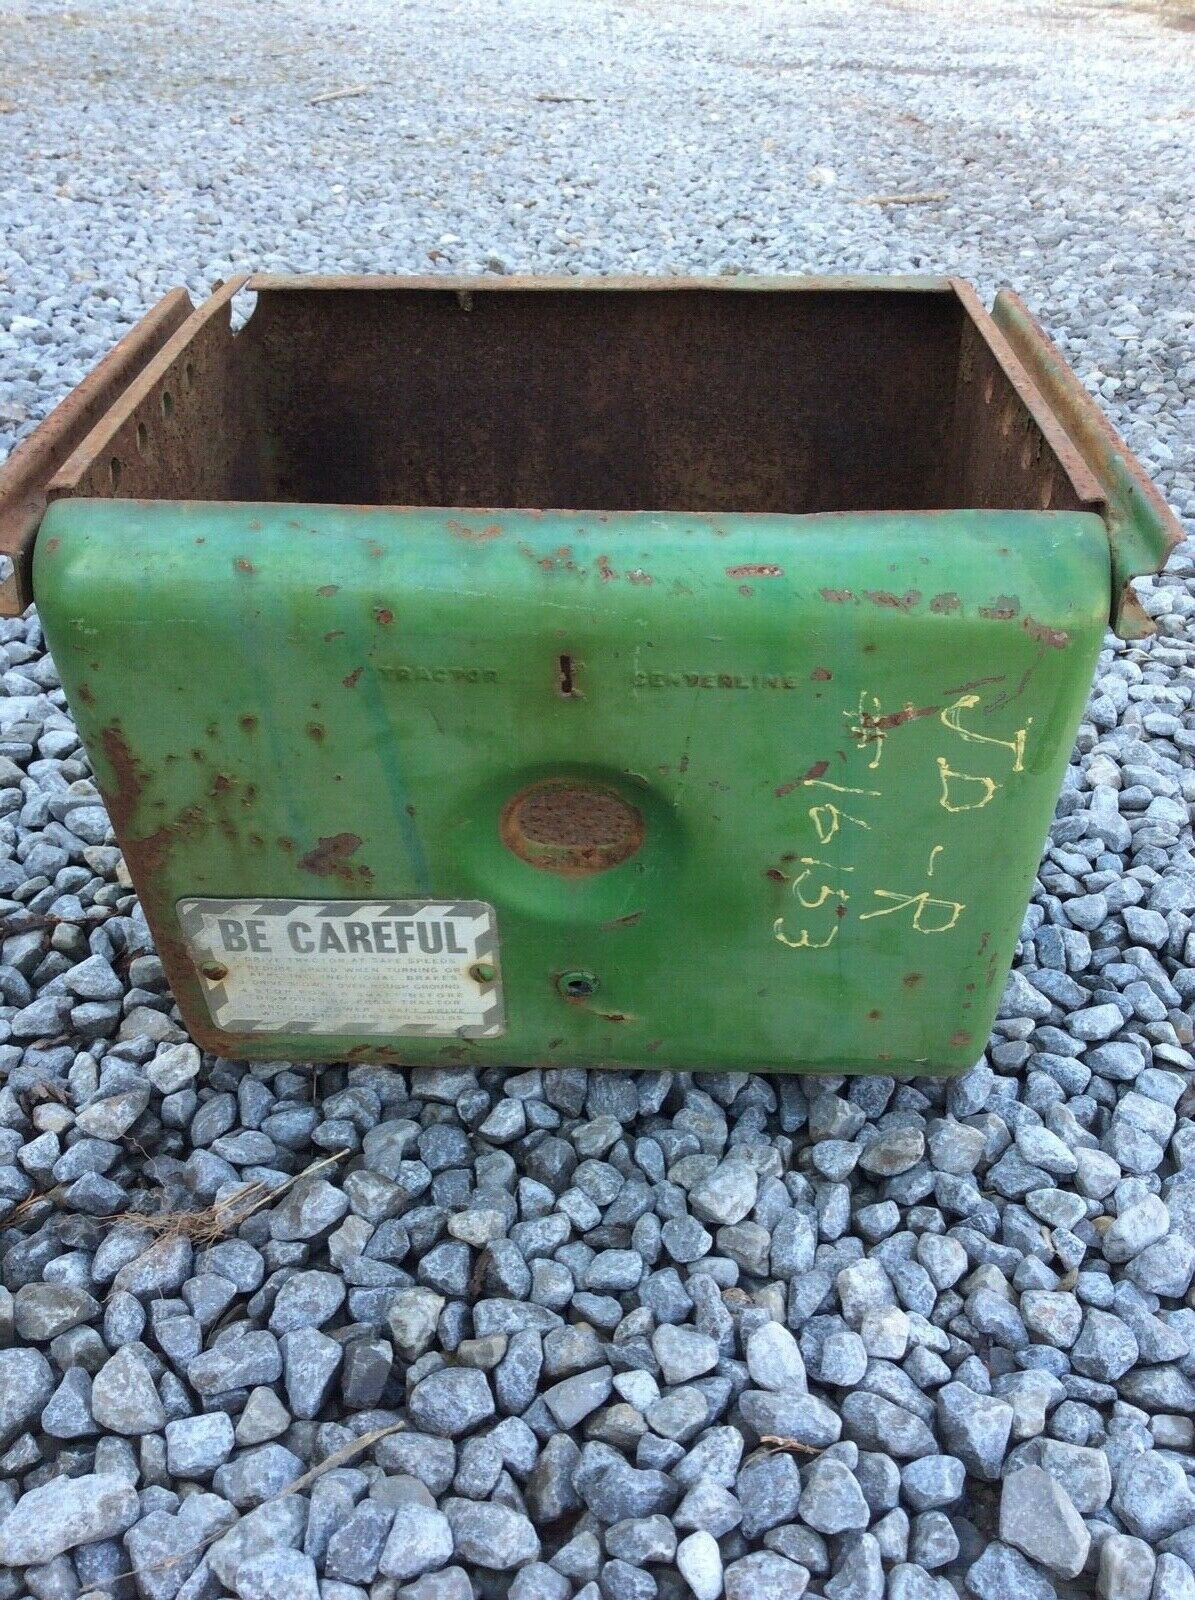 AB4101R John Deere Battery Box With Battery Tray And Caution Plate For B, R, 80